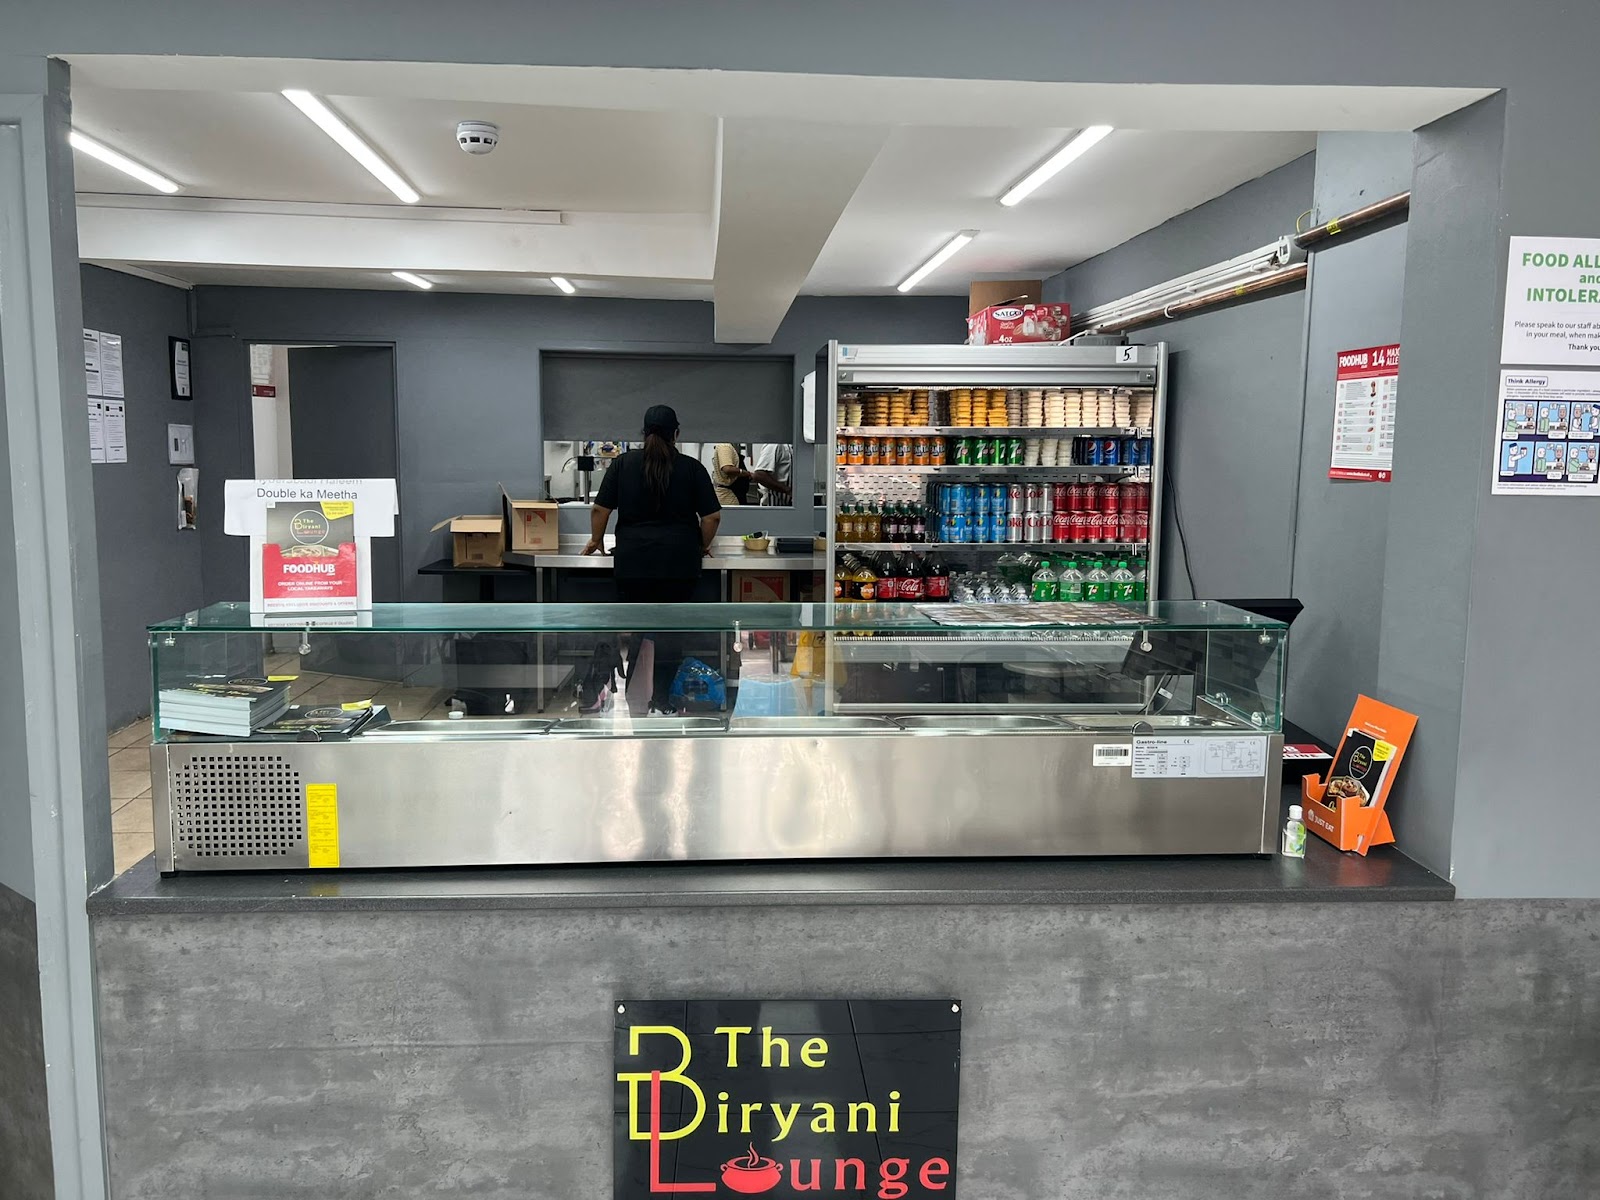 The Biryani Lounge: A House of Indian Flavours - Experience the authentic taste of Indian cuisine at The Biryani Lounge, the best Indian restaurant in Reading, UK.